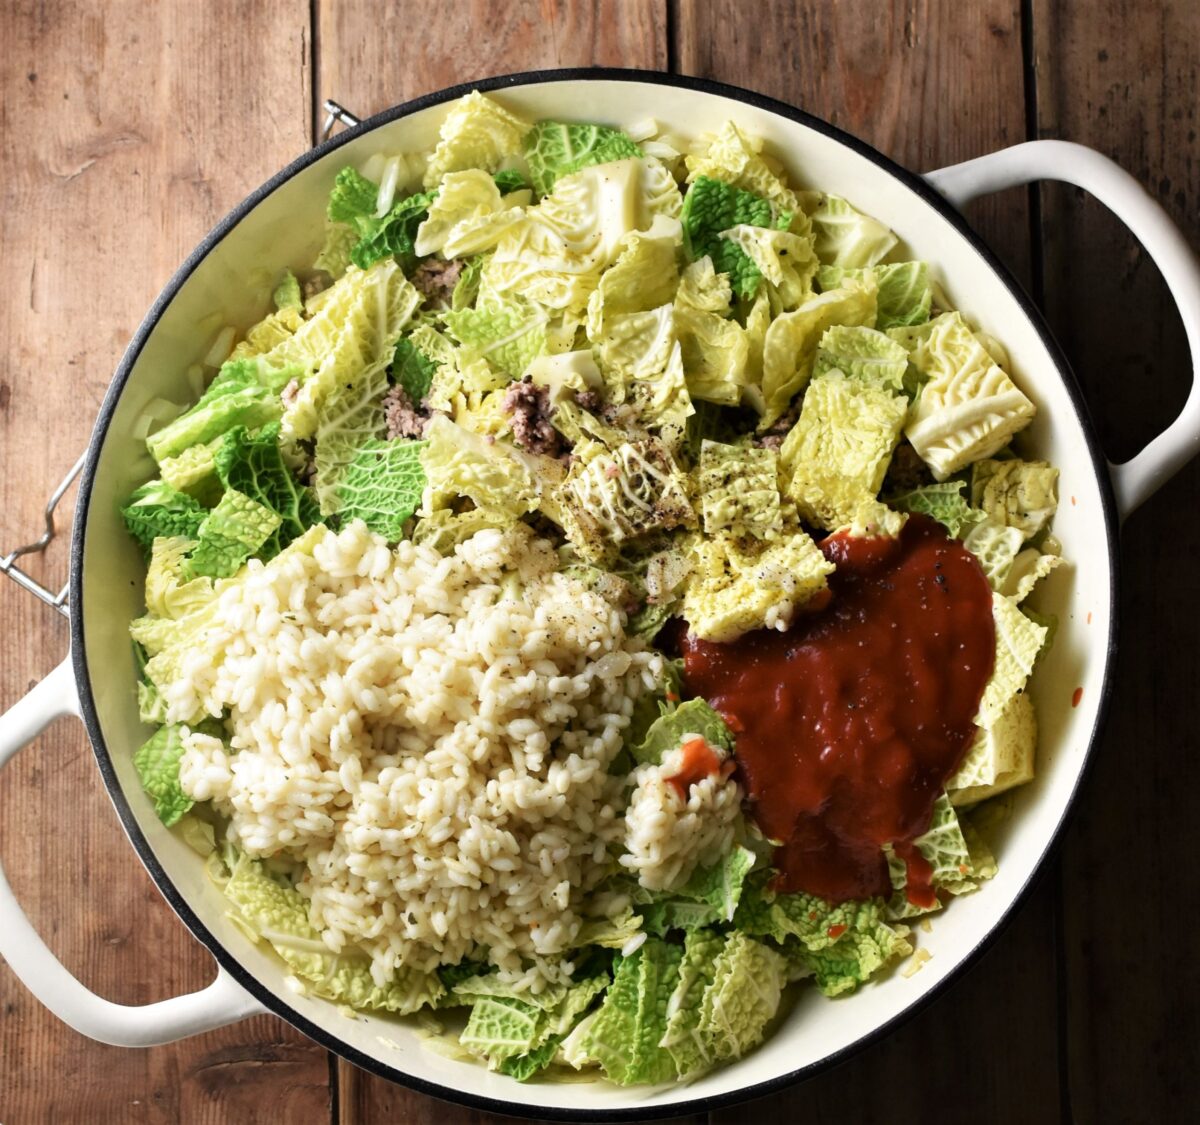 Chopped cabbage, rice and tomato passata in large shallow white pan.